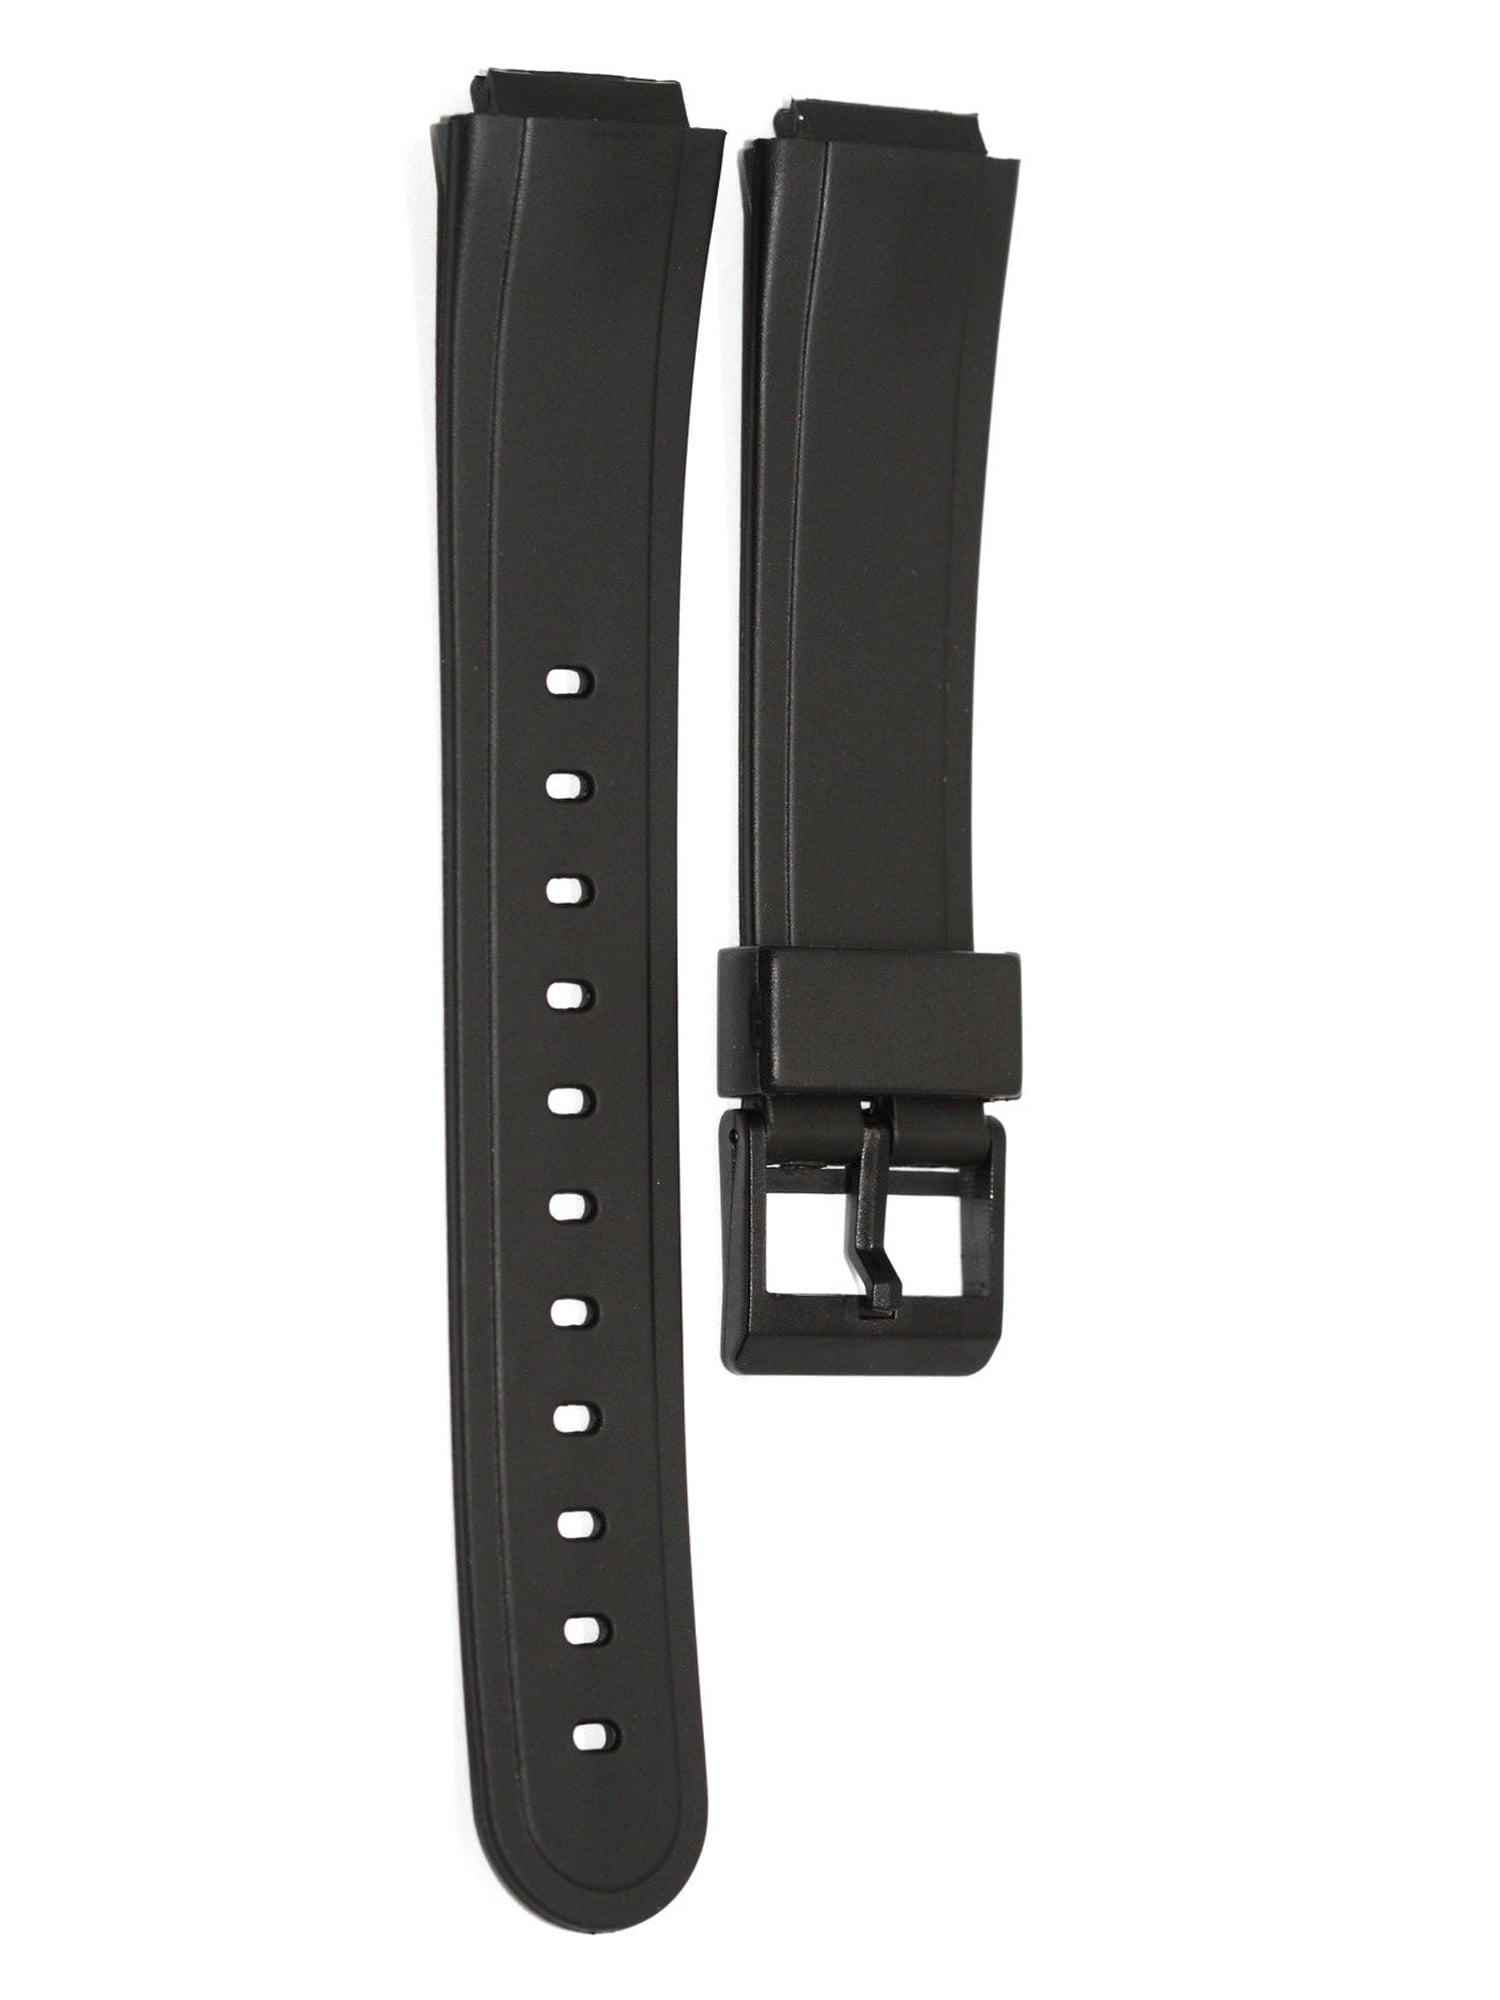 15mm Black Rubber Casio Replacement Sport Gear Watch Band Strap ...